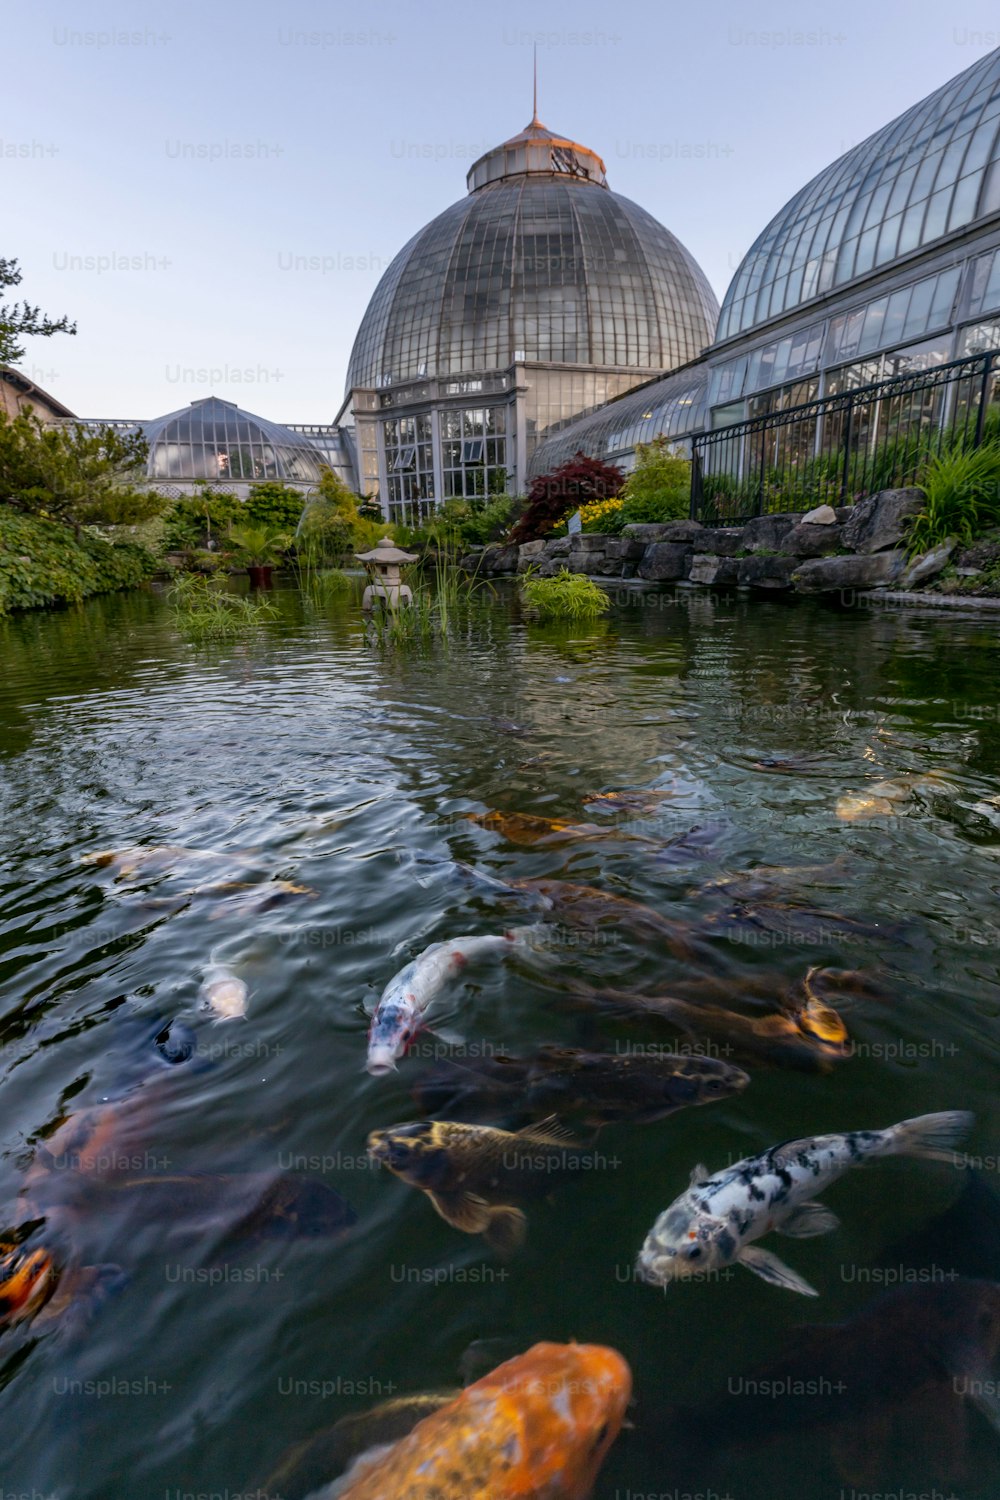 A vertical shot of koi fish in the water and a glass botanical garden in the background on Belle Isle